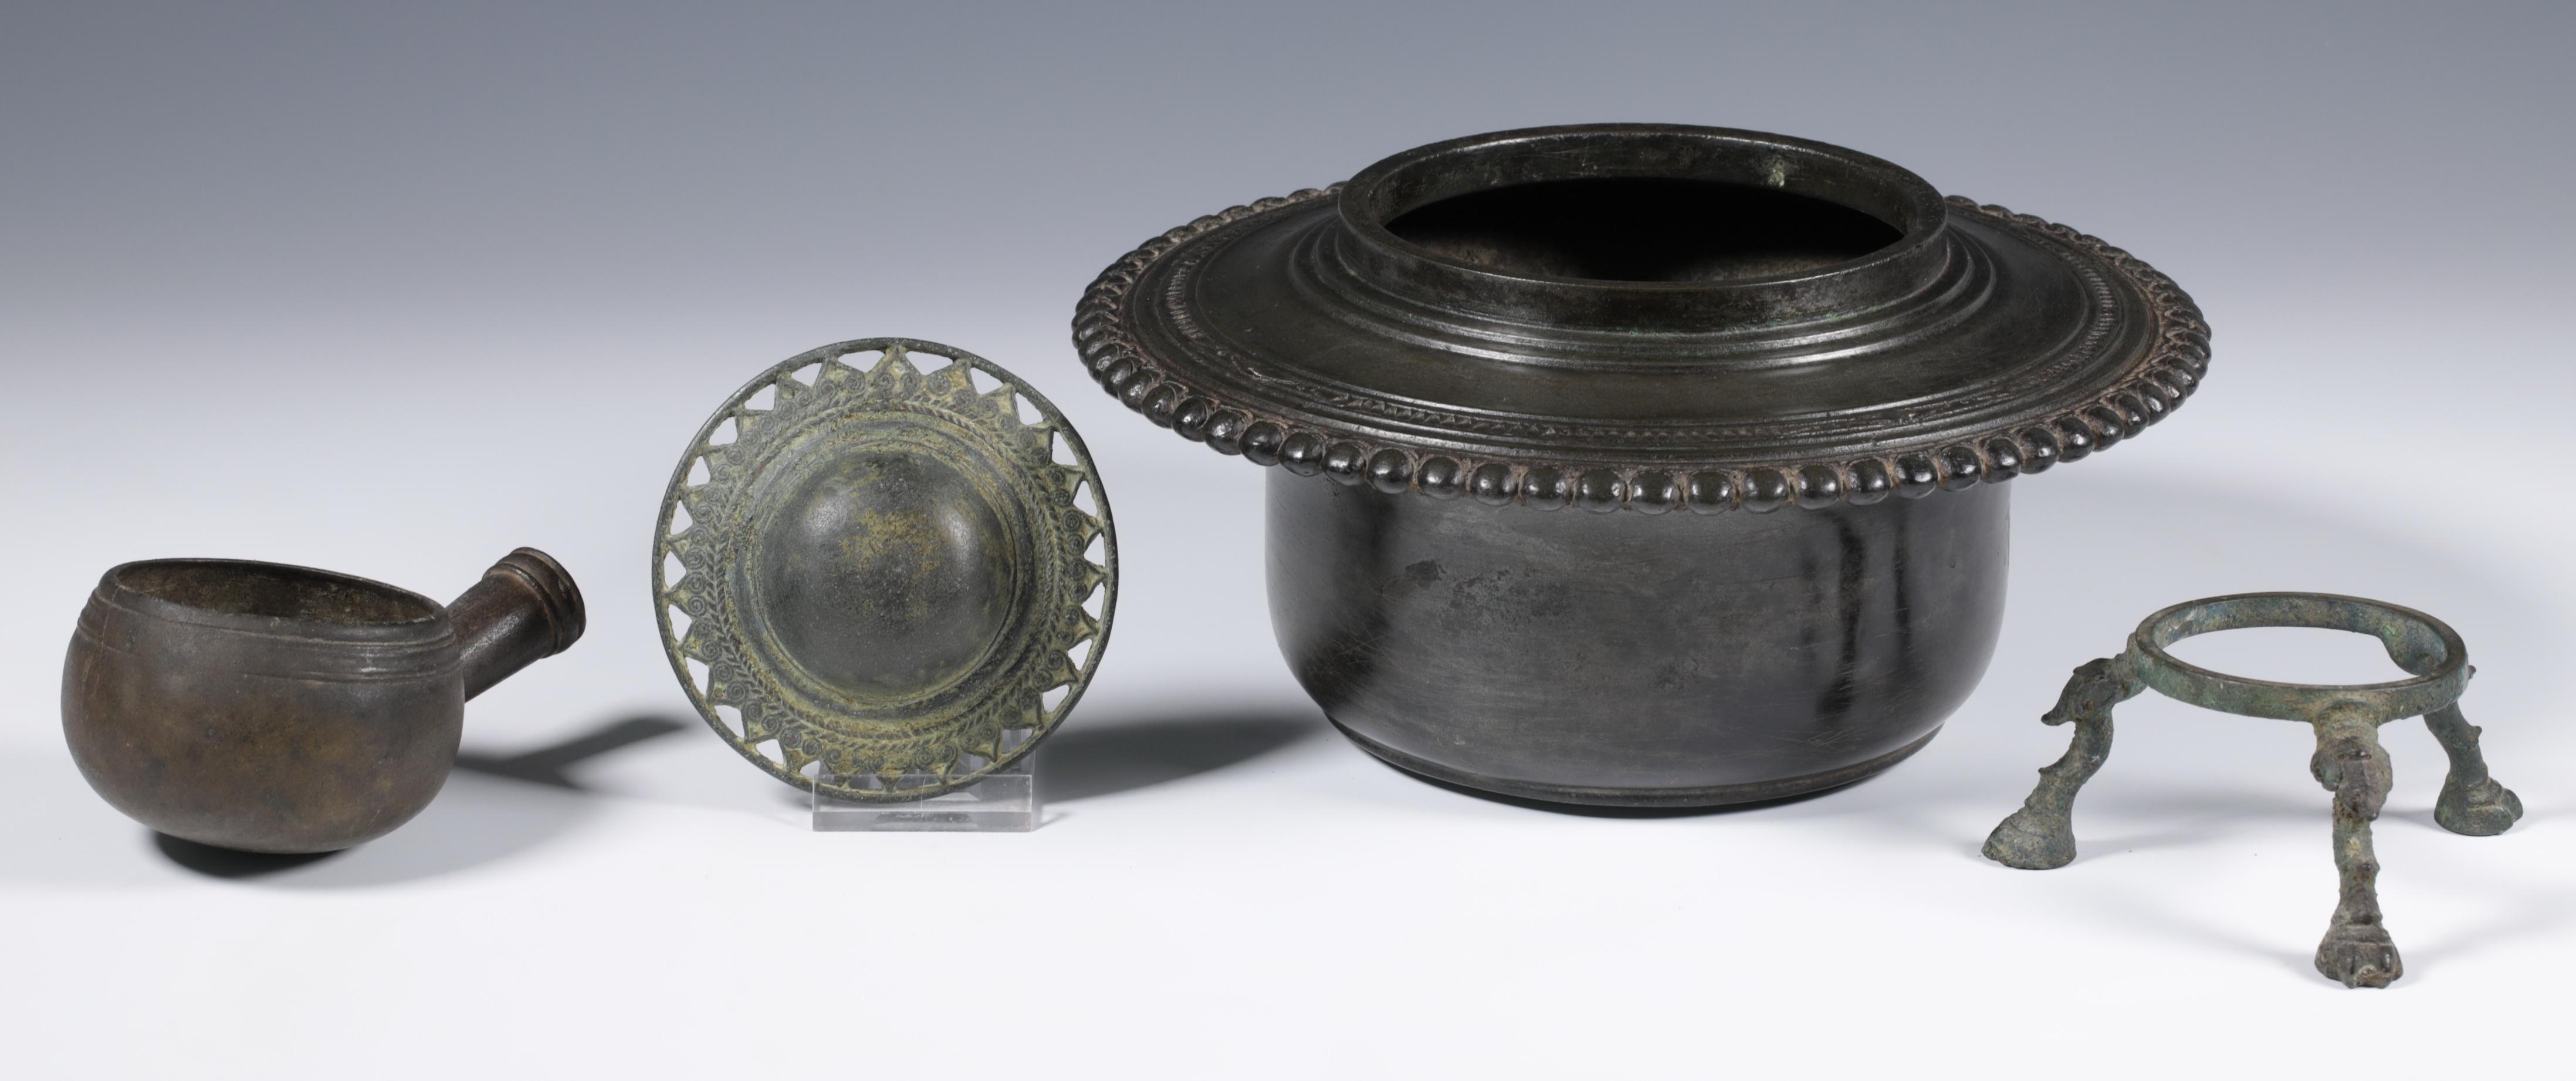 Java, a bronze East-Javanese period style holy water container; herewith a bronze buckle, a scoop an